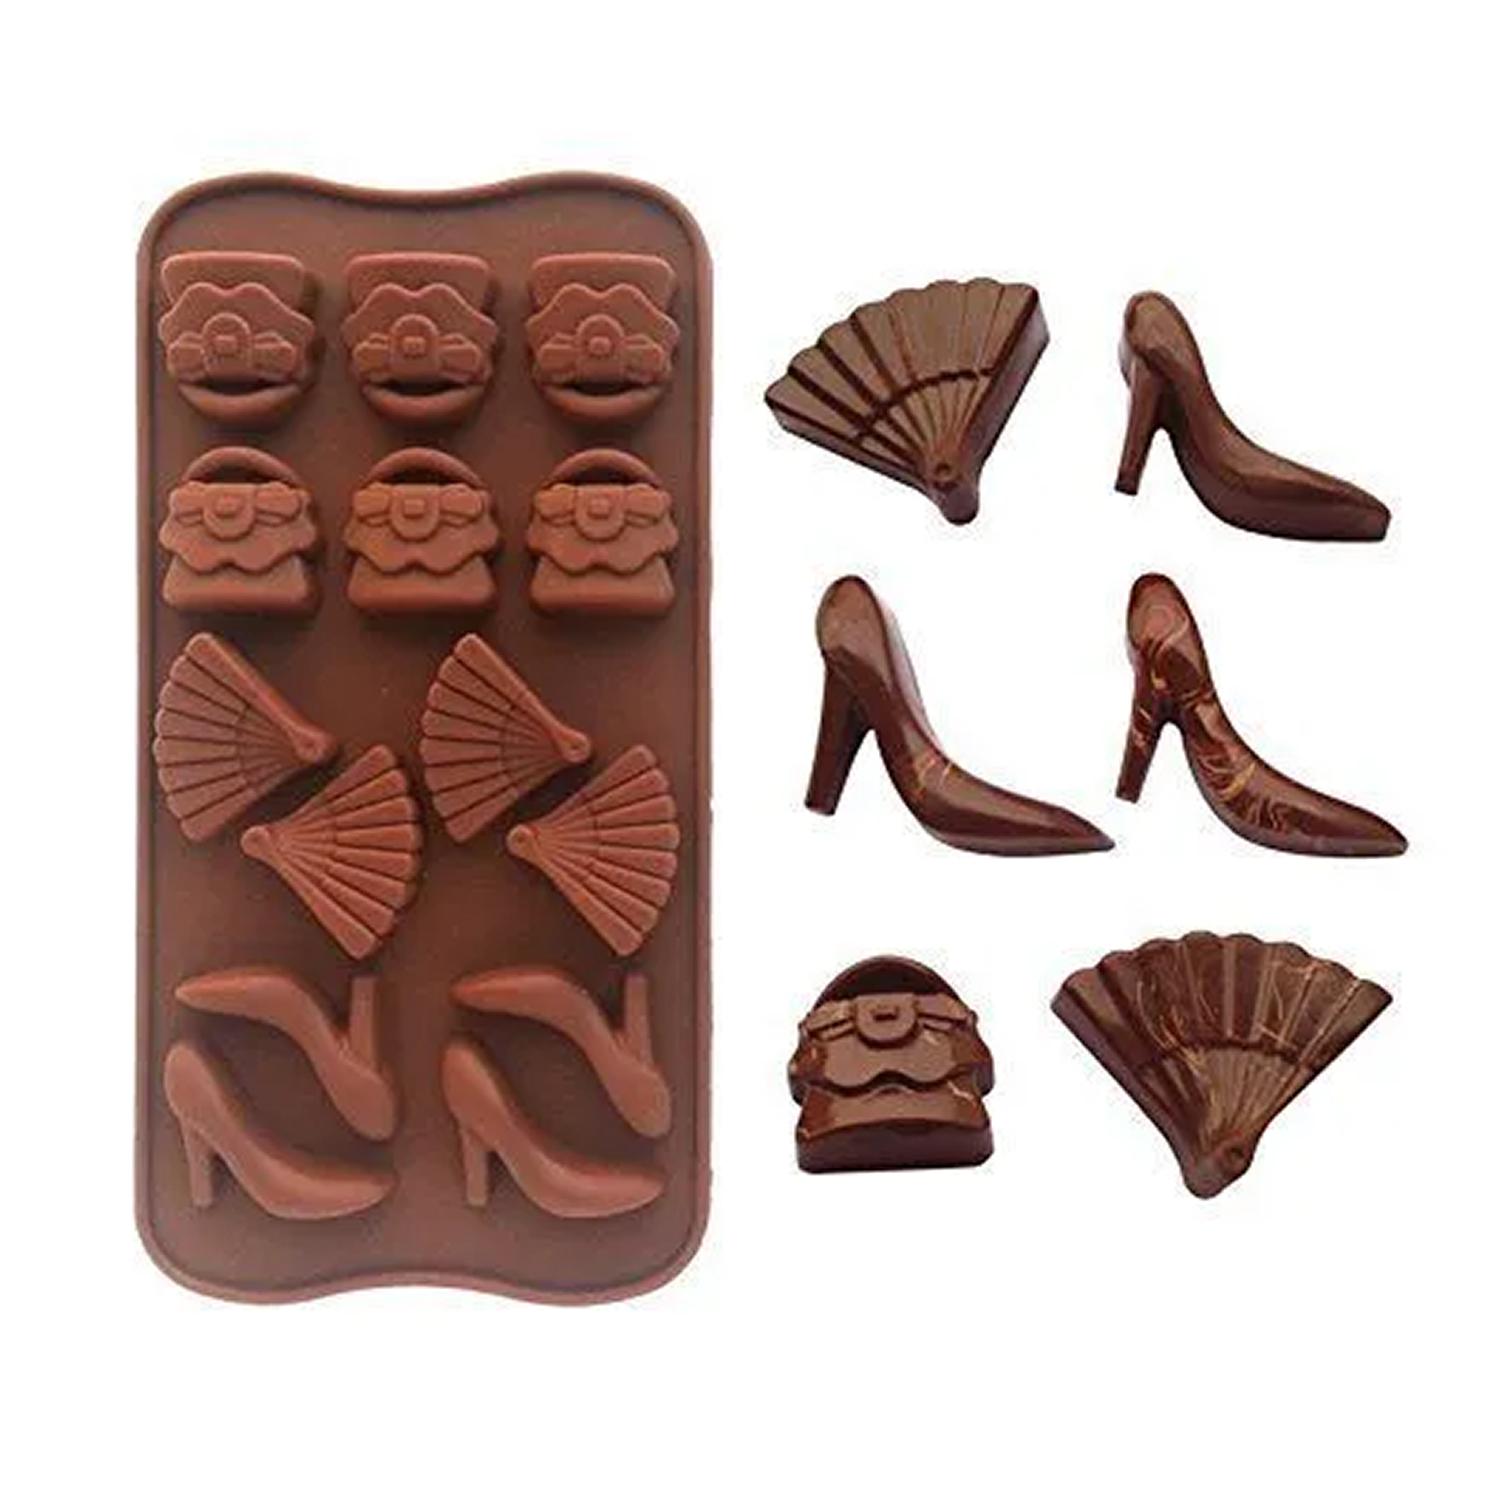 SCM0025 HEELS FANS BAGS SHAPE SILICONE CHOCOLATE MOLD